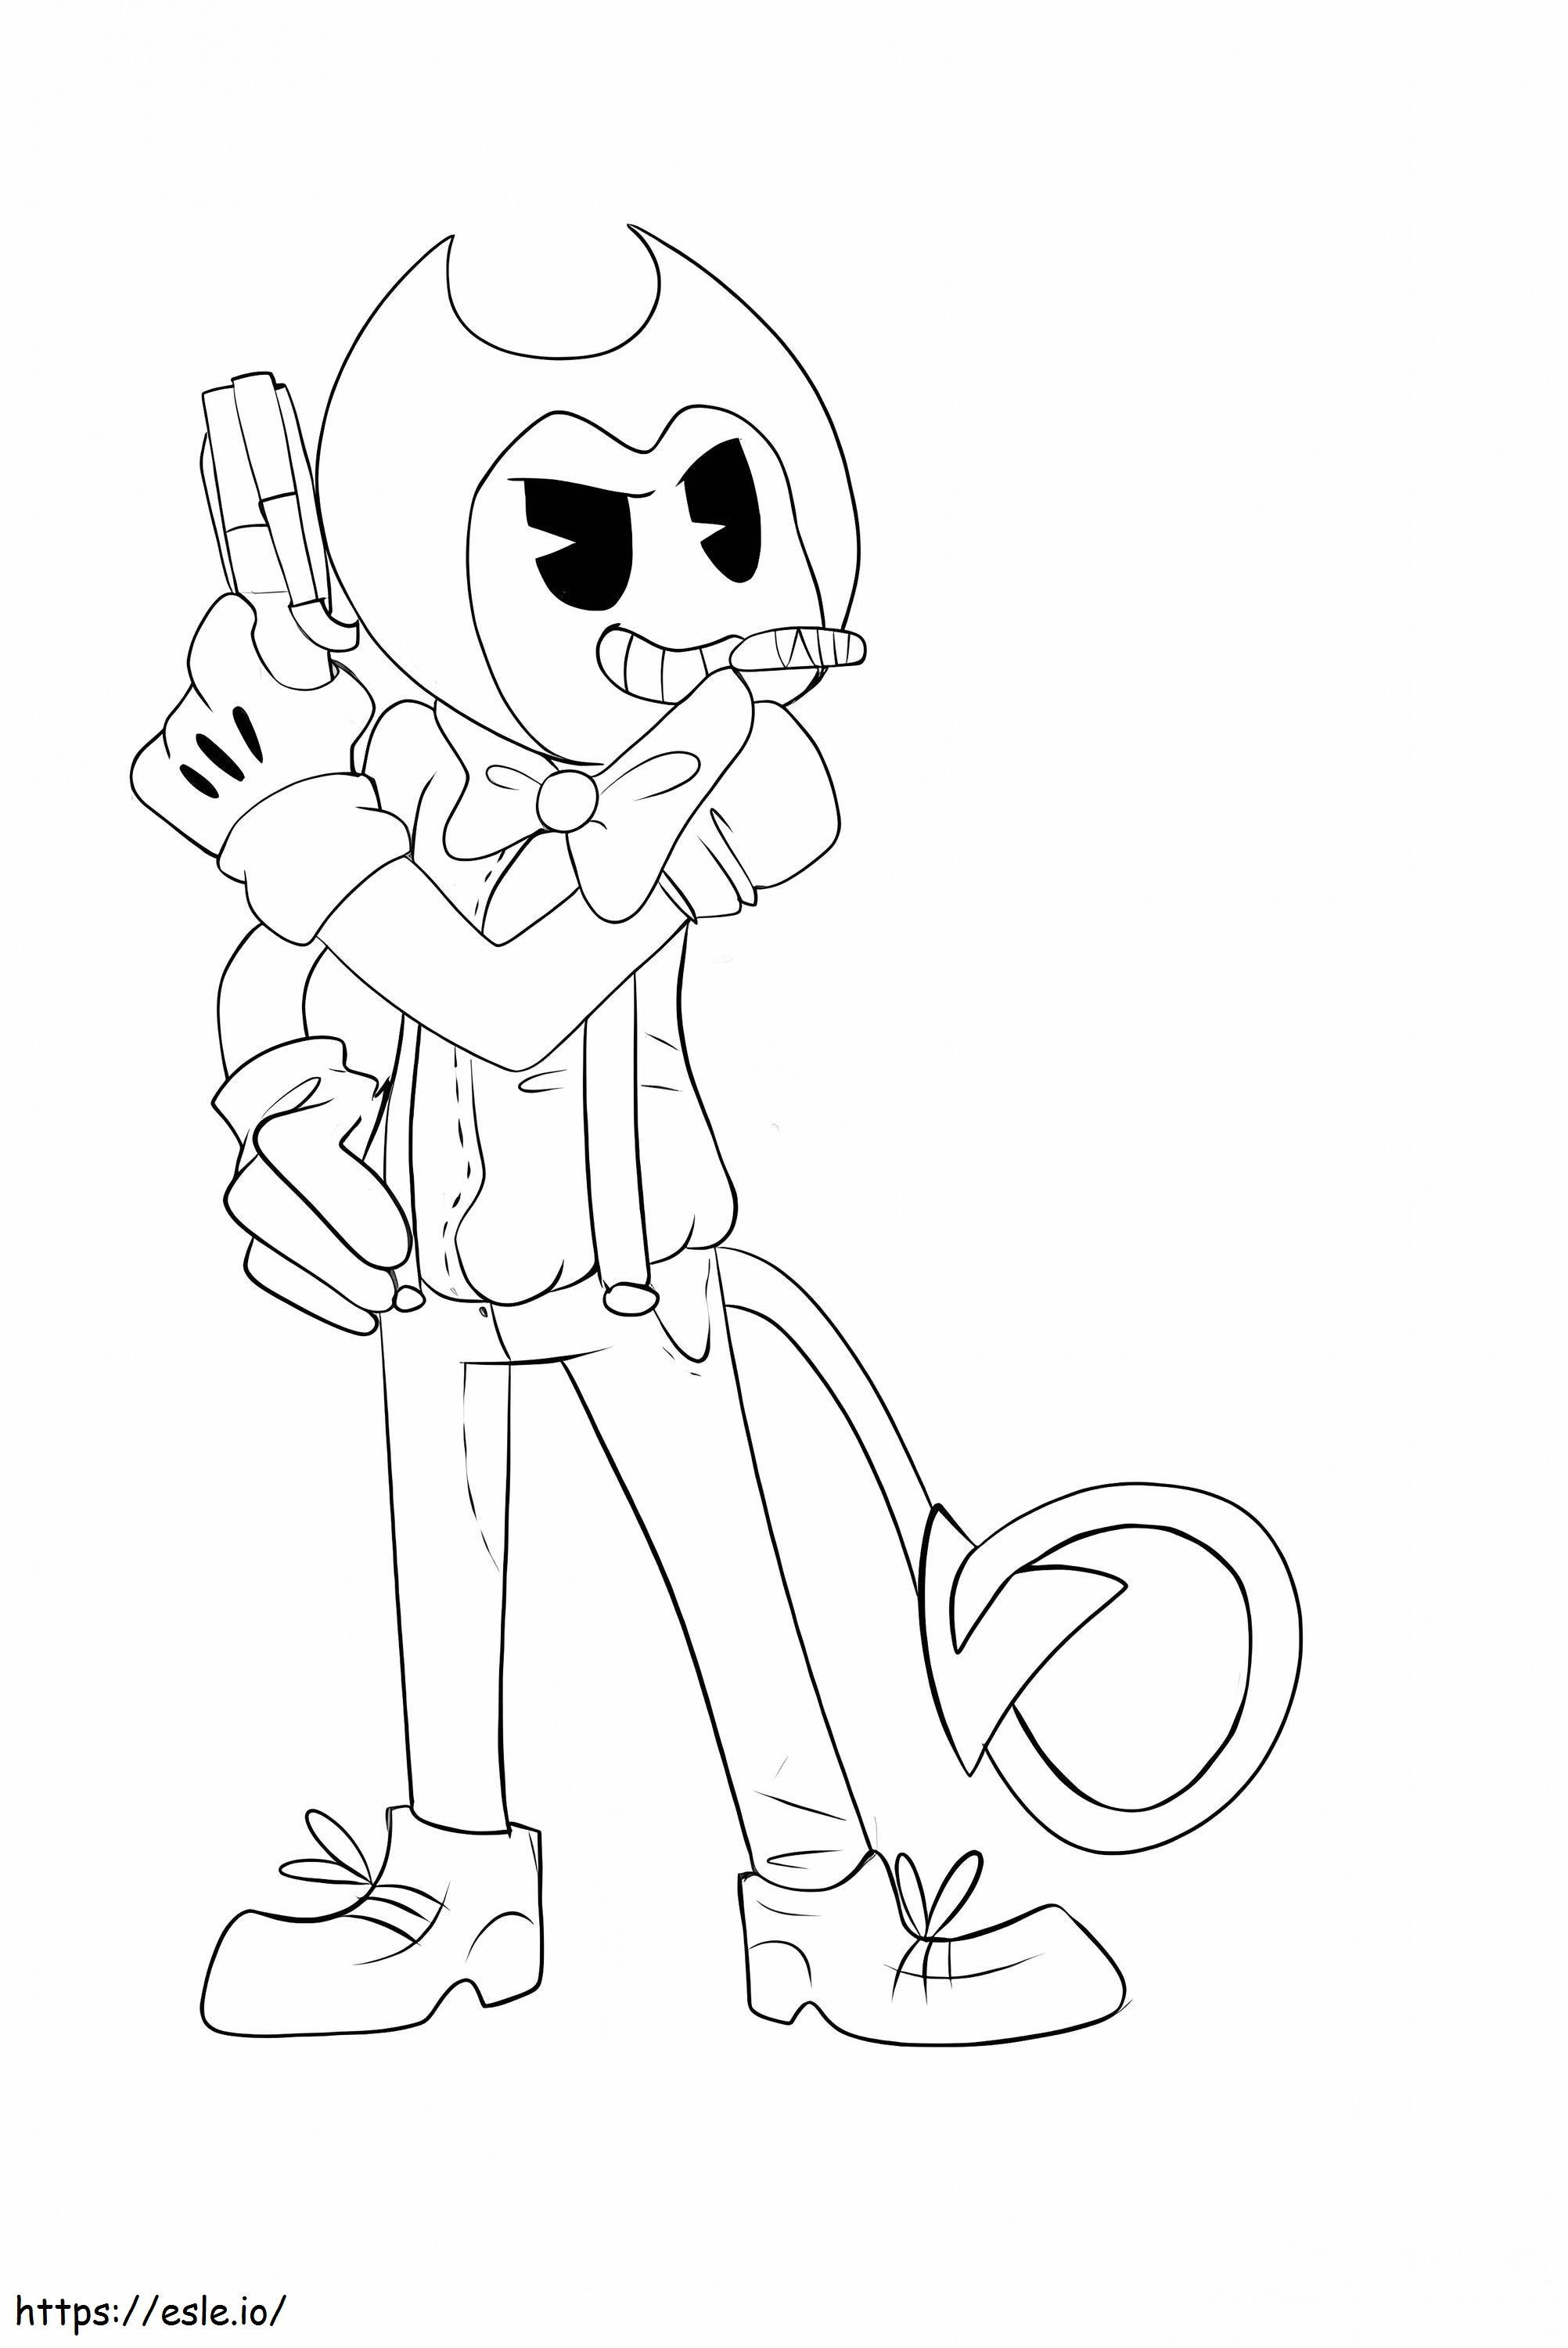 1559610744 Bendy With The Gun A4 coloring page